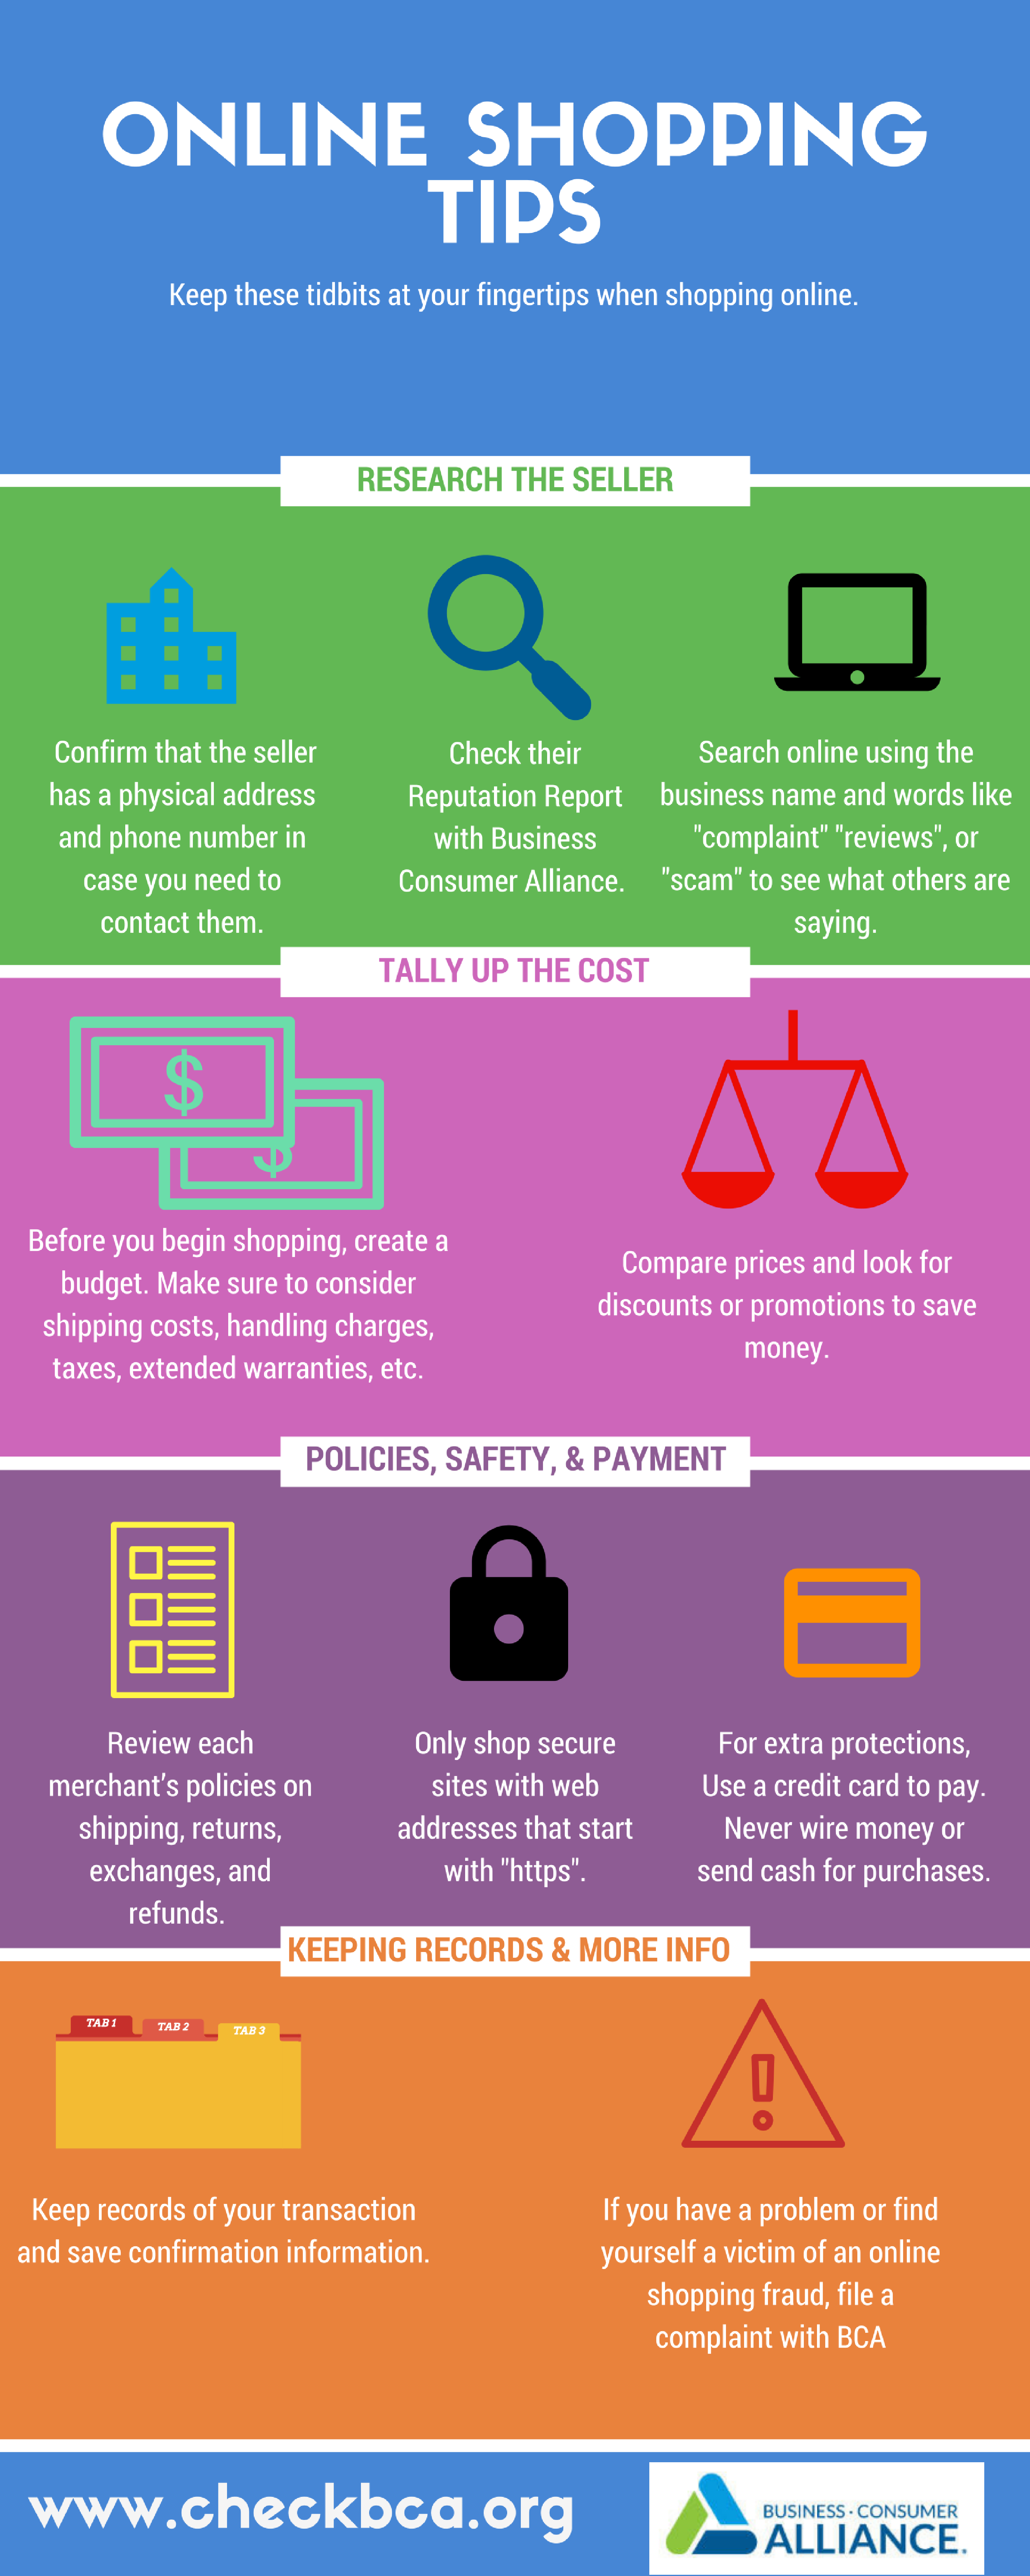 shopping infographic